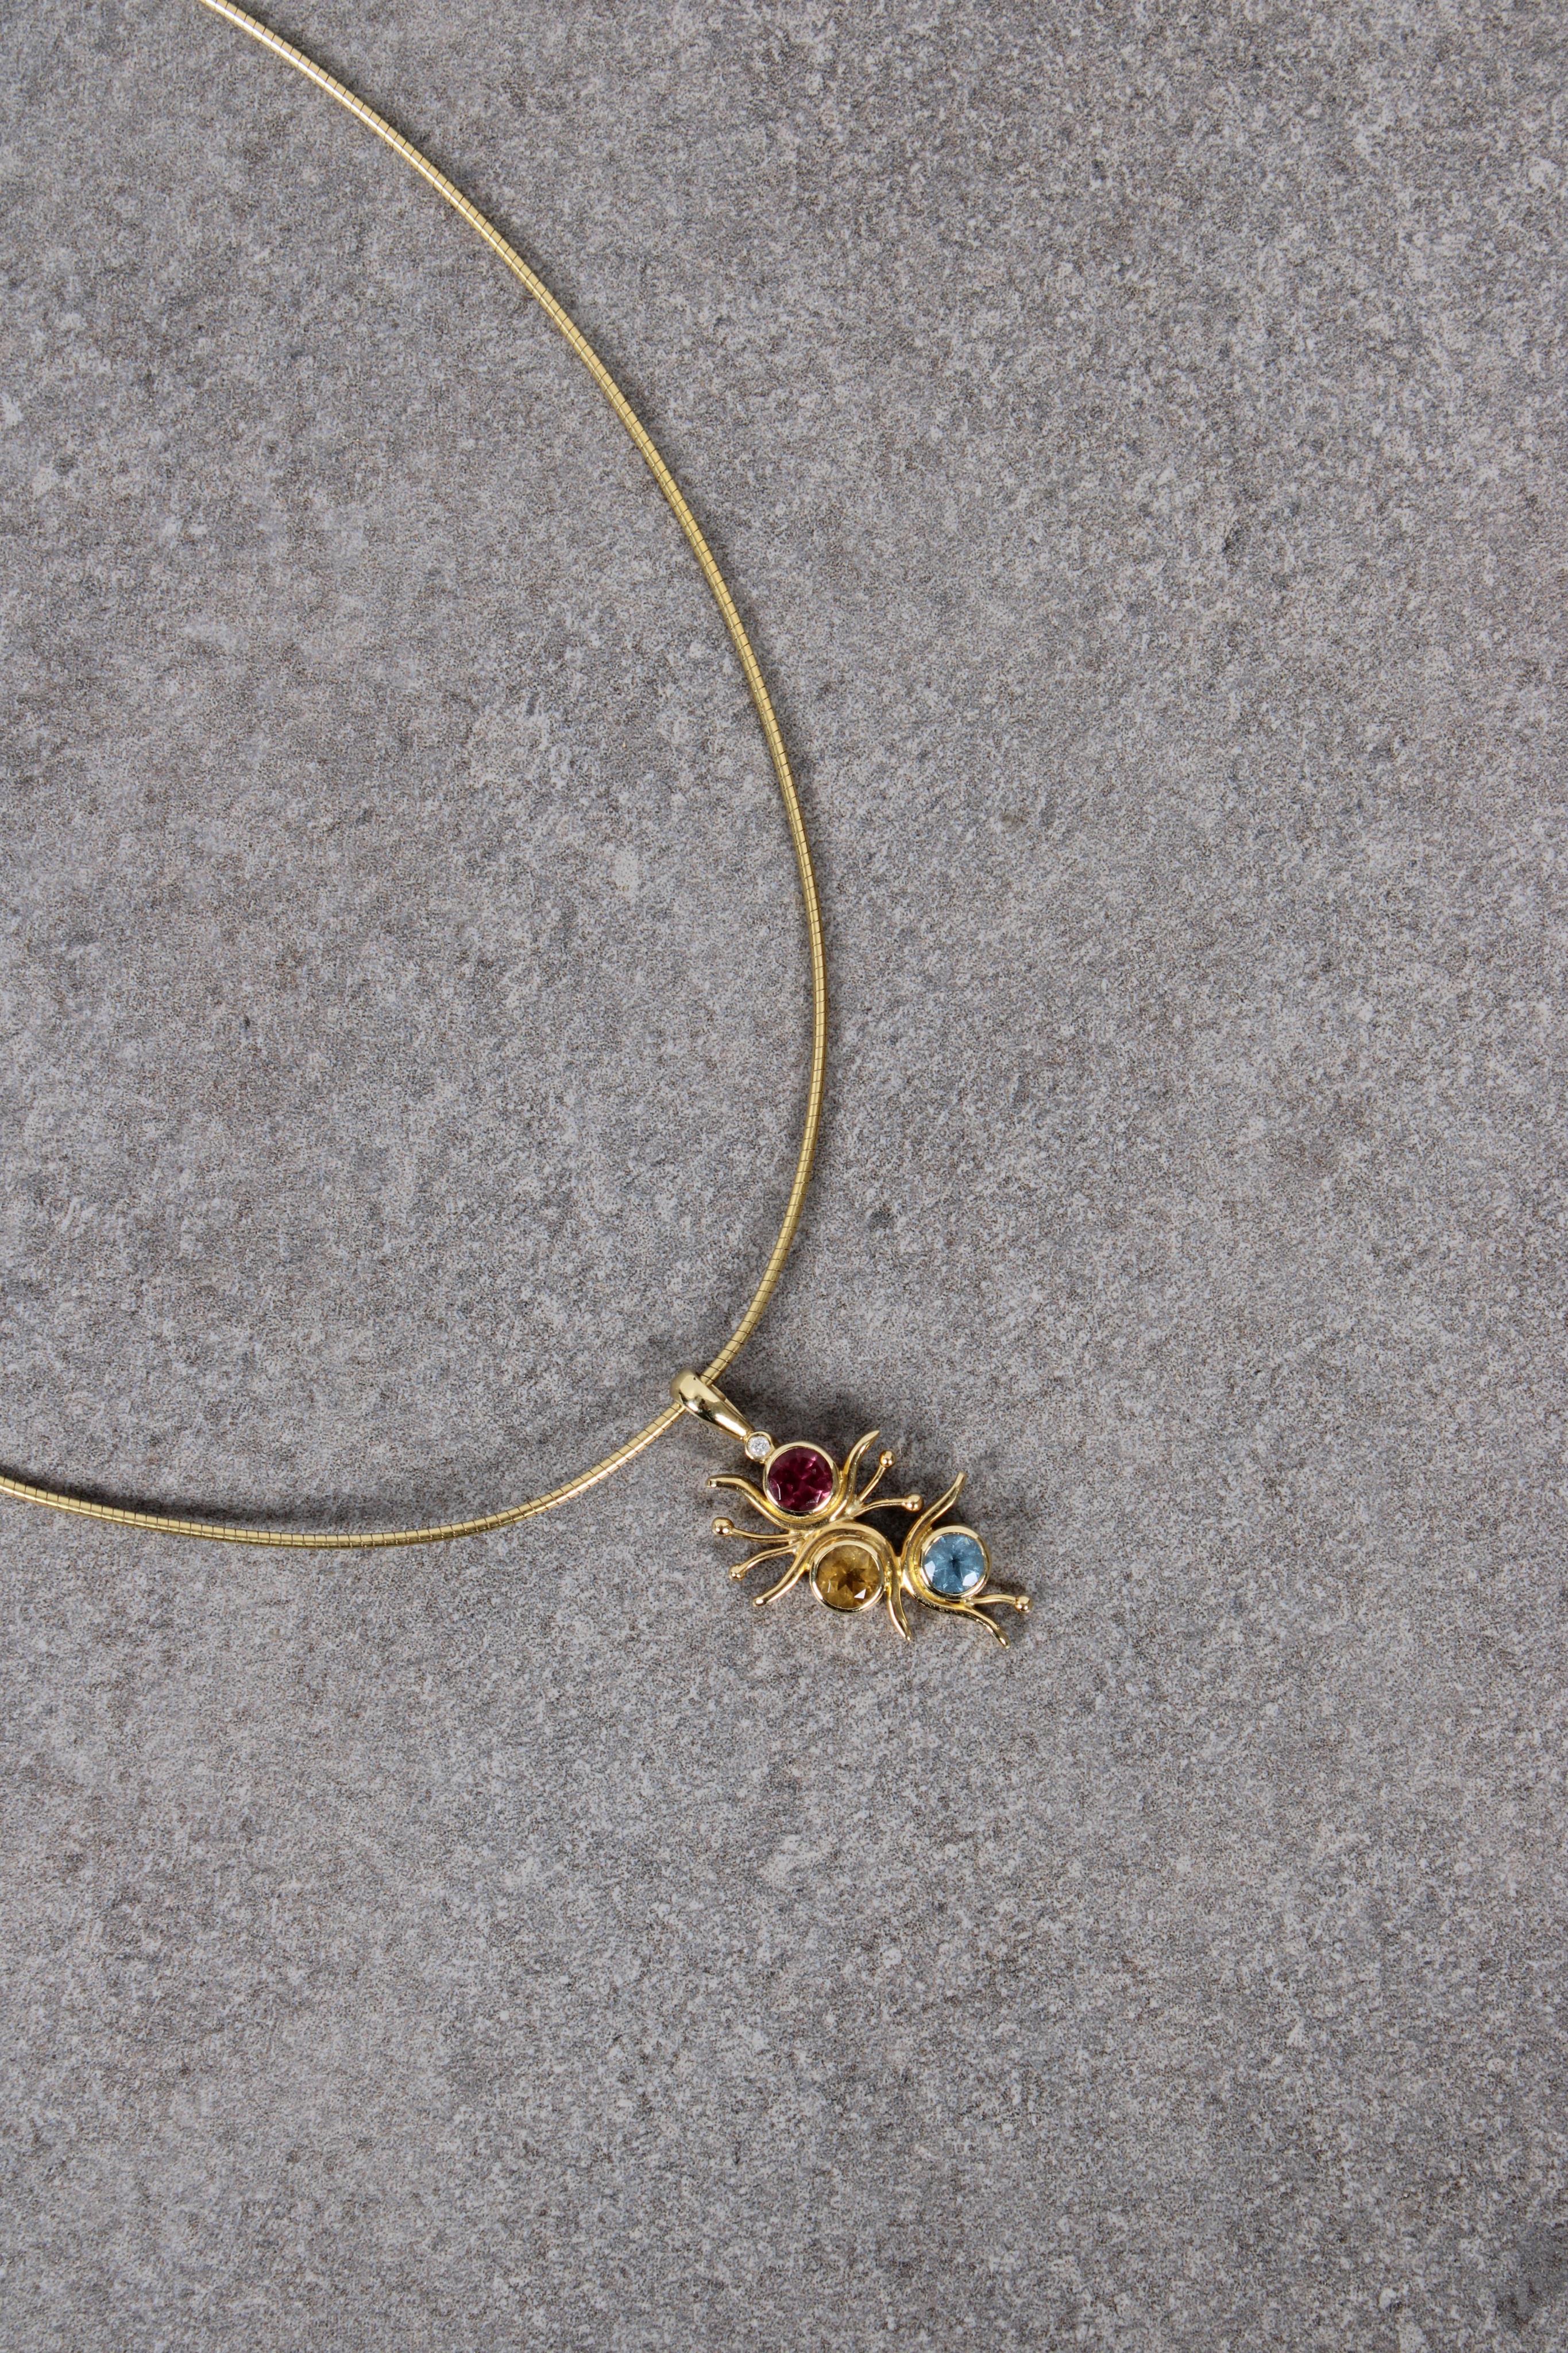 A Catherine Best 18ct yellow gold gem-set necklace